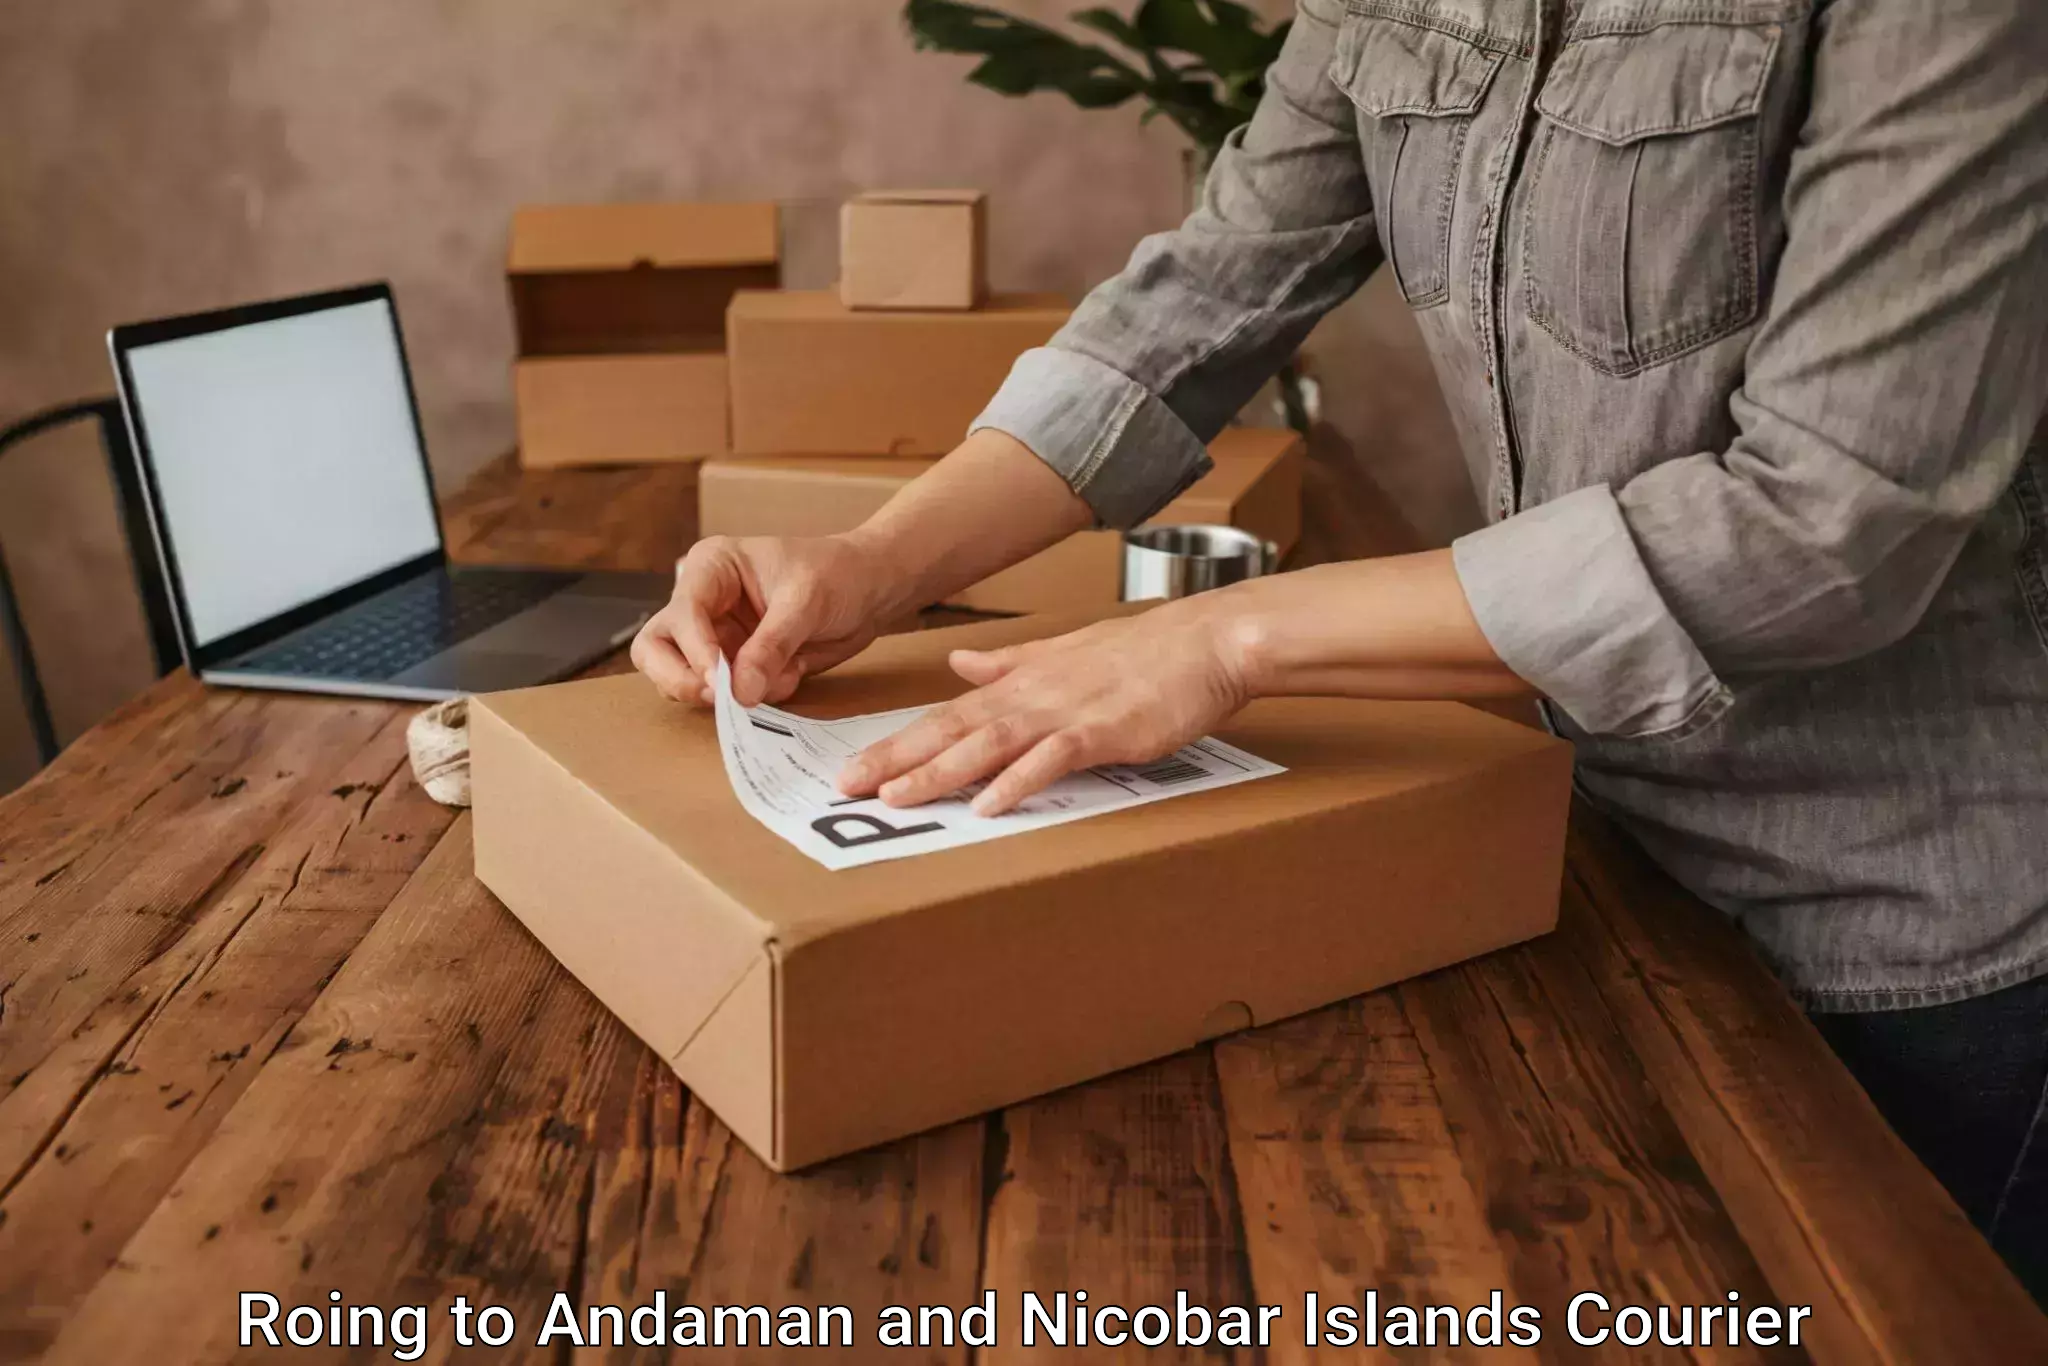 International courier networks Roing to Andaman and Nicobar Islands